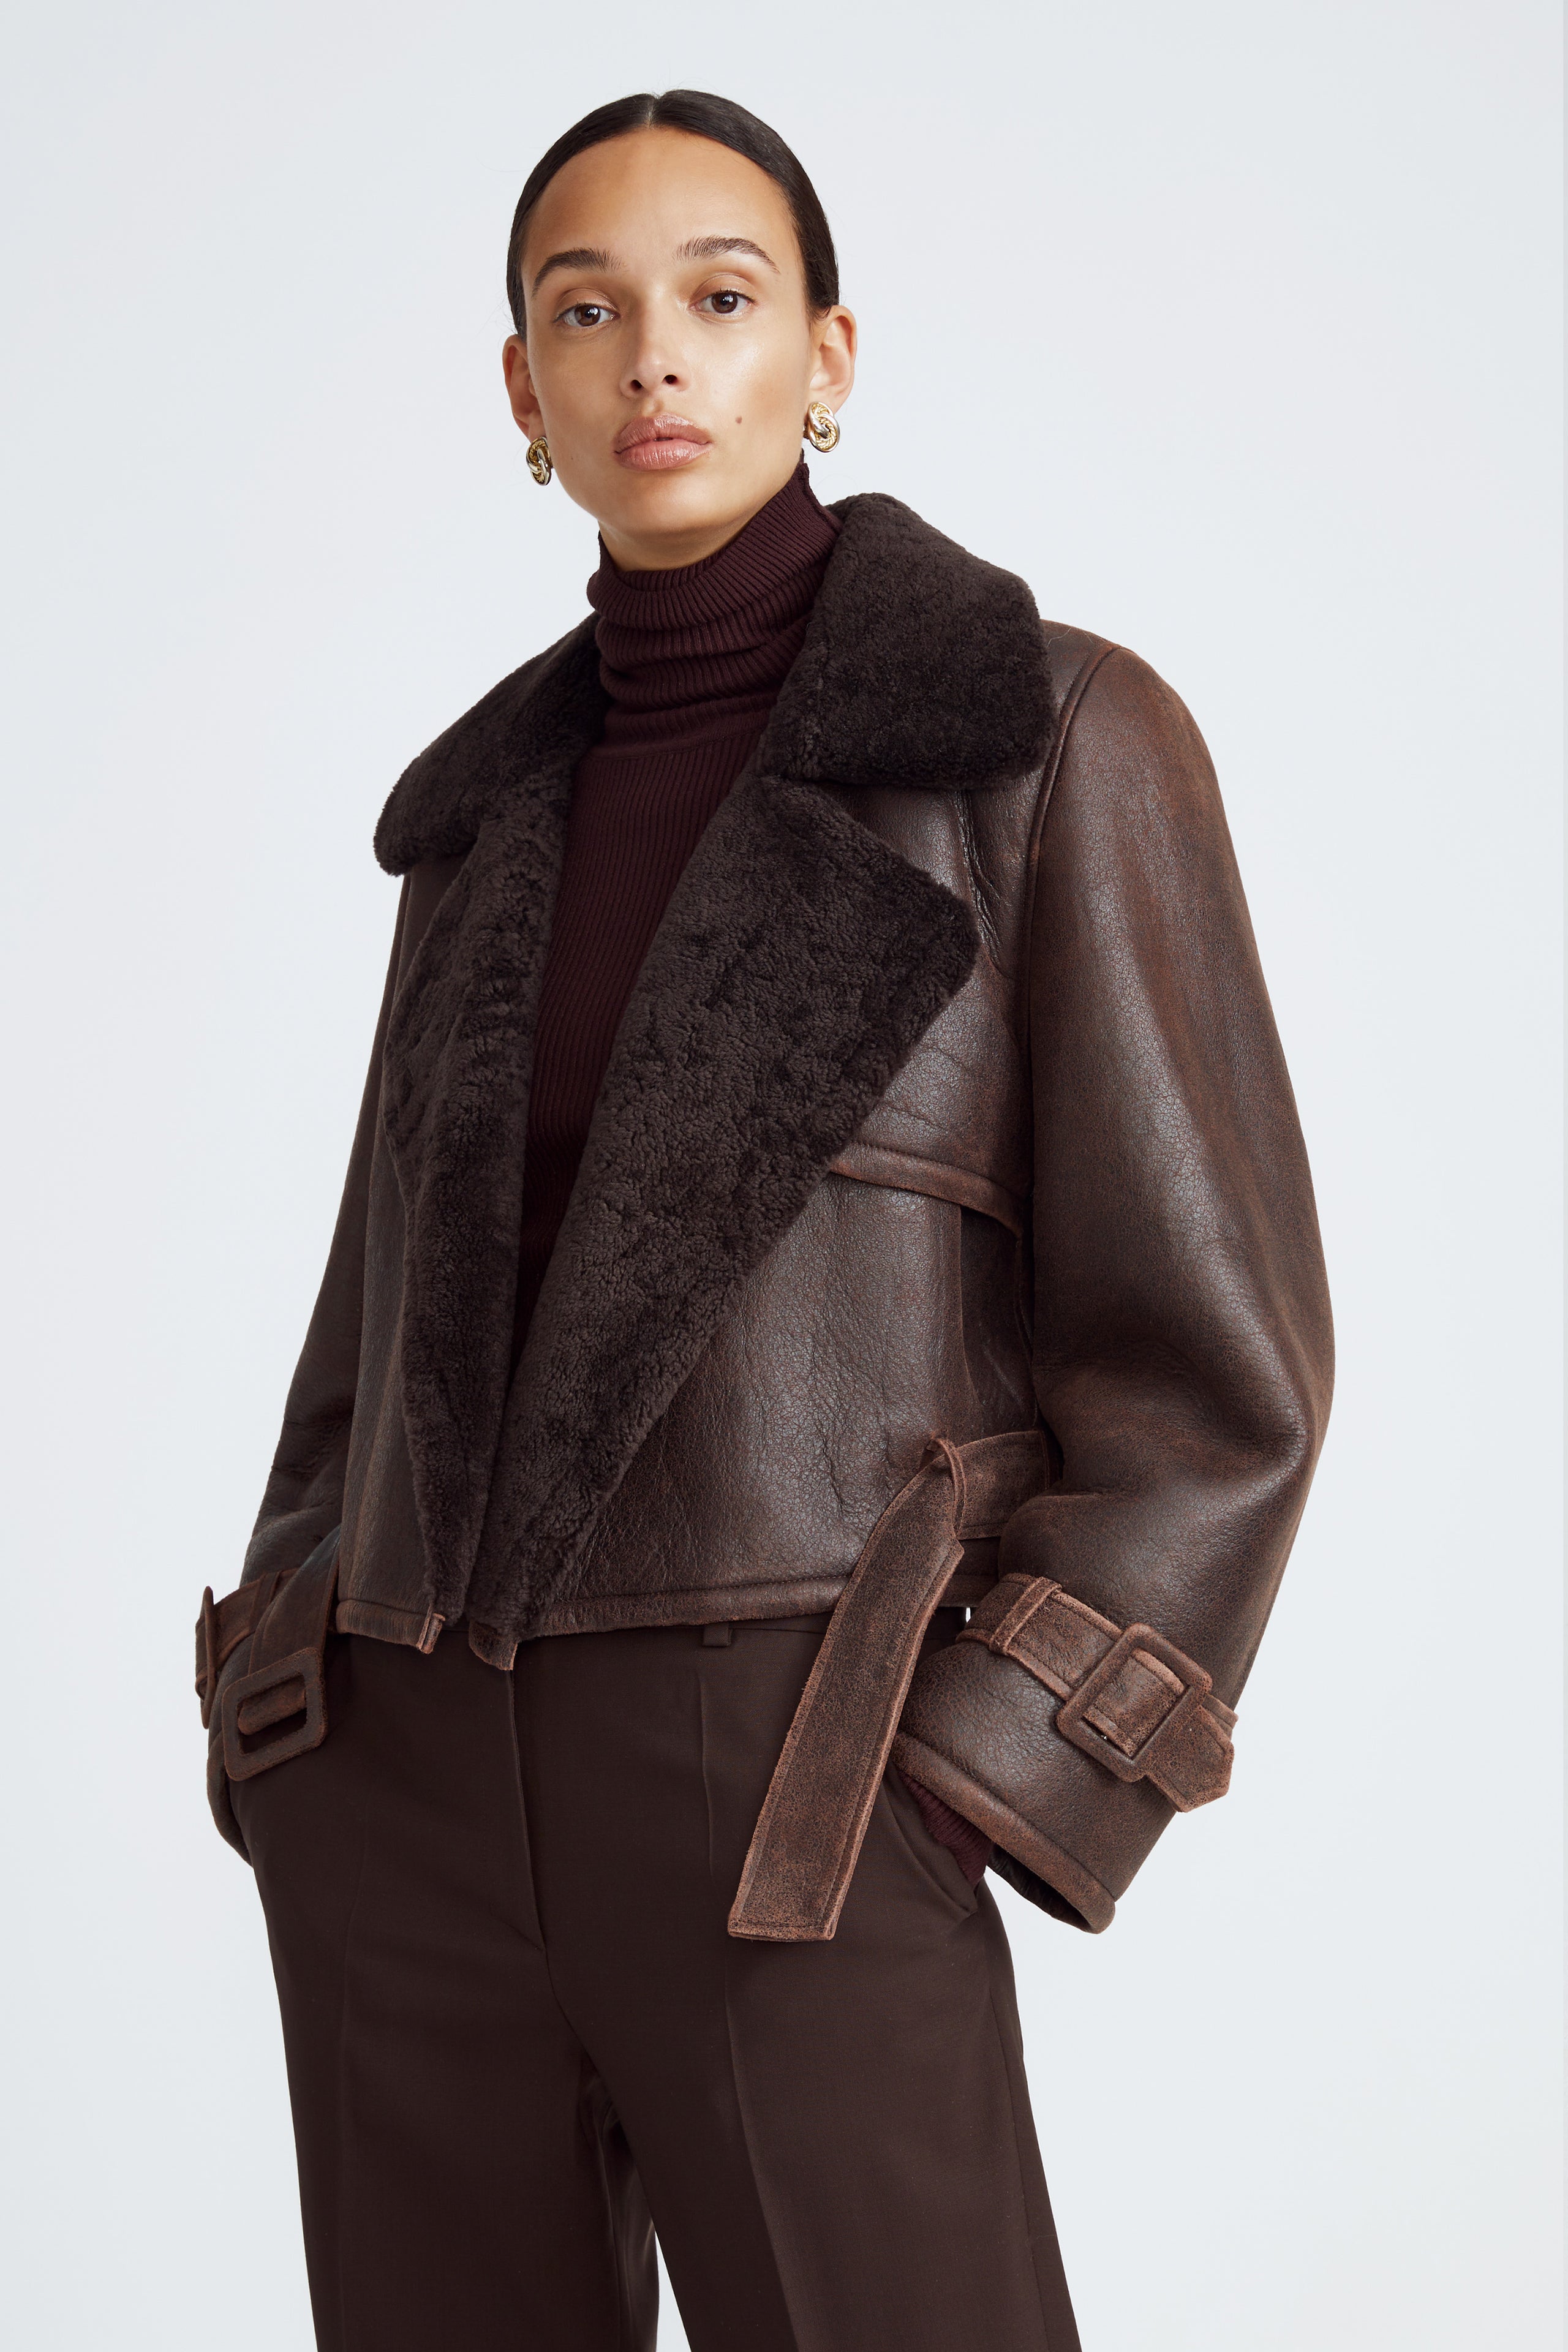 Model is wearing the Hatti Shearling Dark Chocolate Cropped Shearling Jacket Close Up